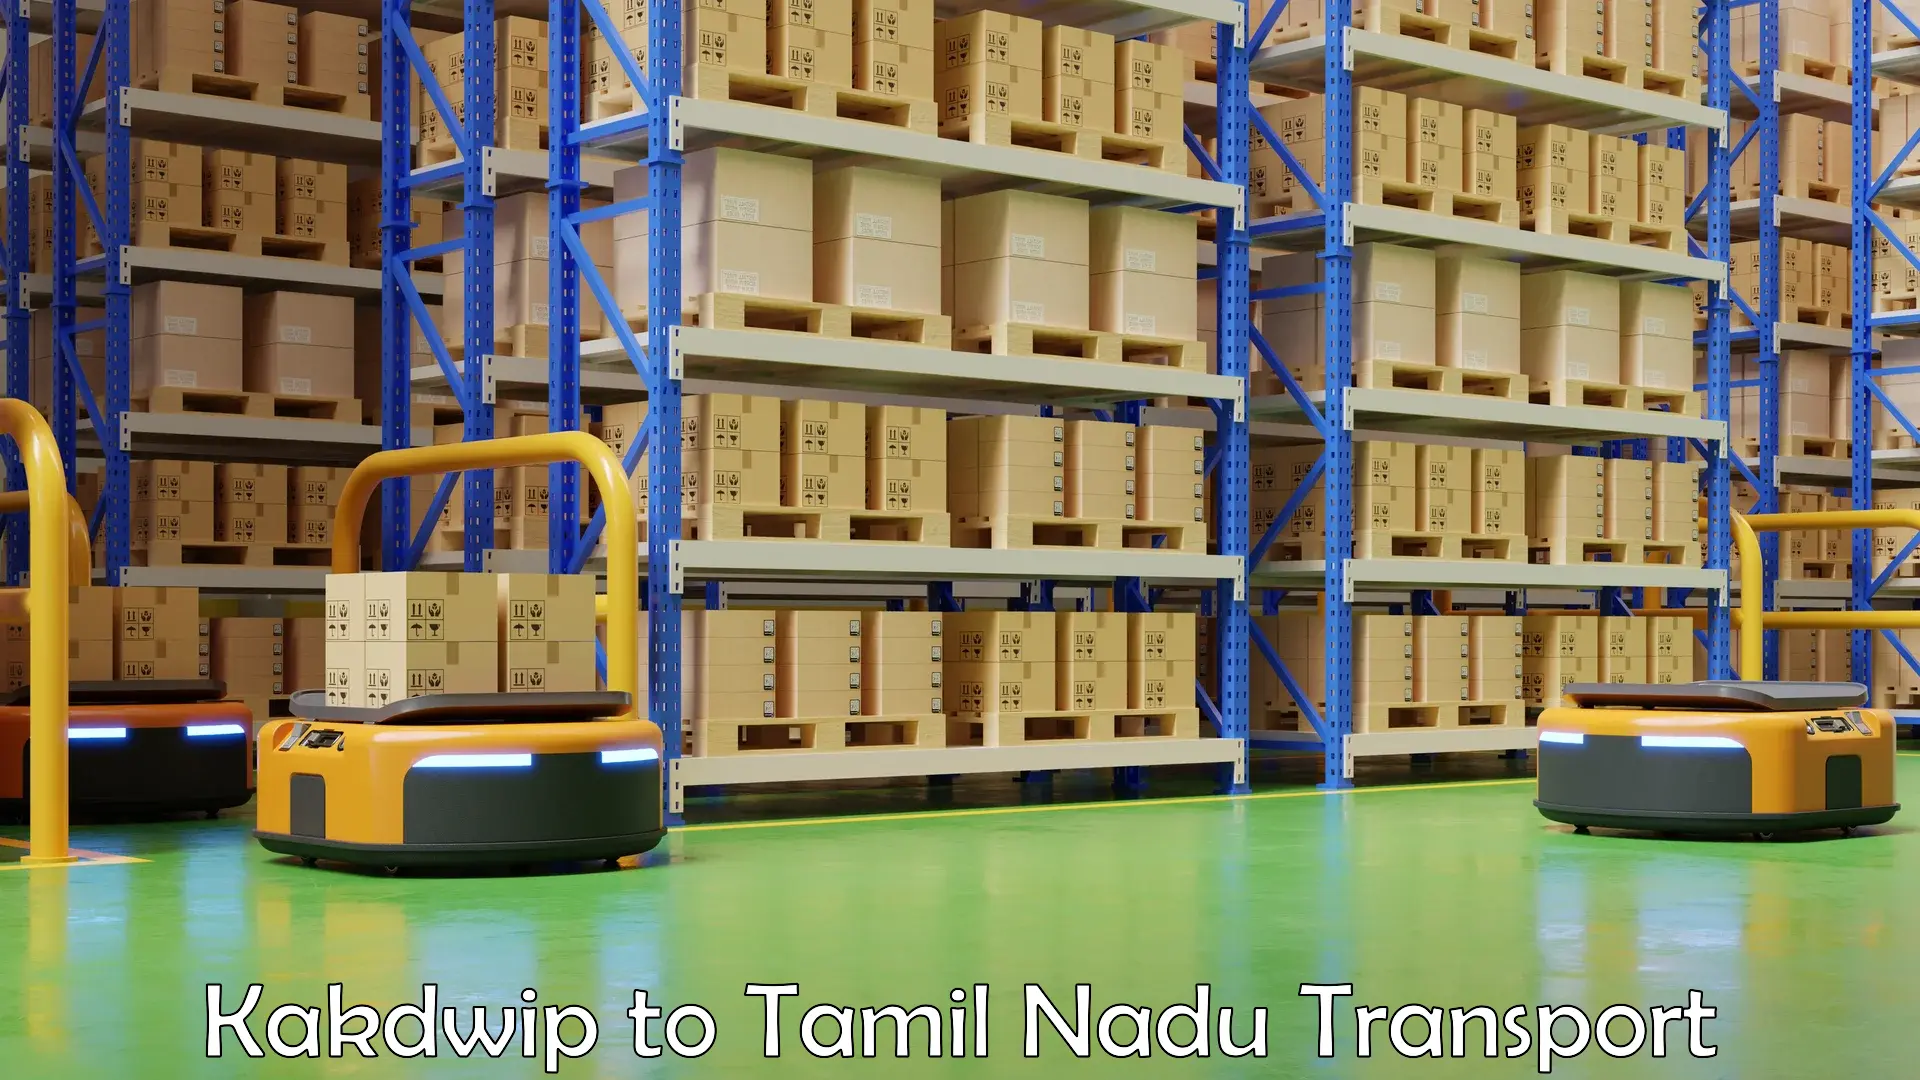 Shipping services Kakdwip to Sri Ramachandra Institute of Higher Education and Research Chennai